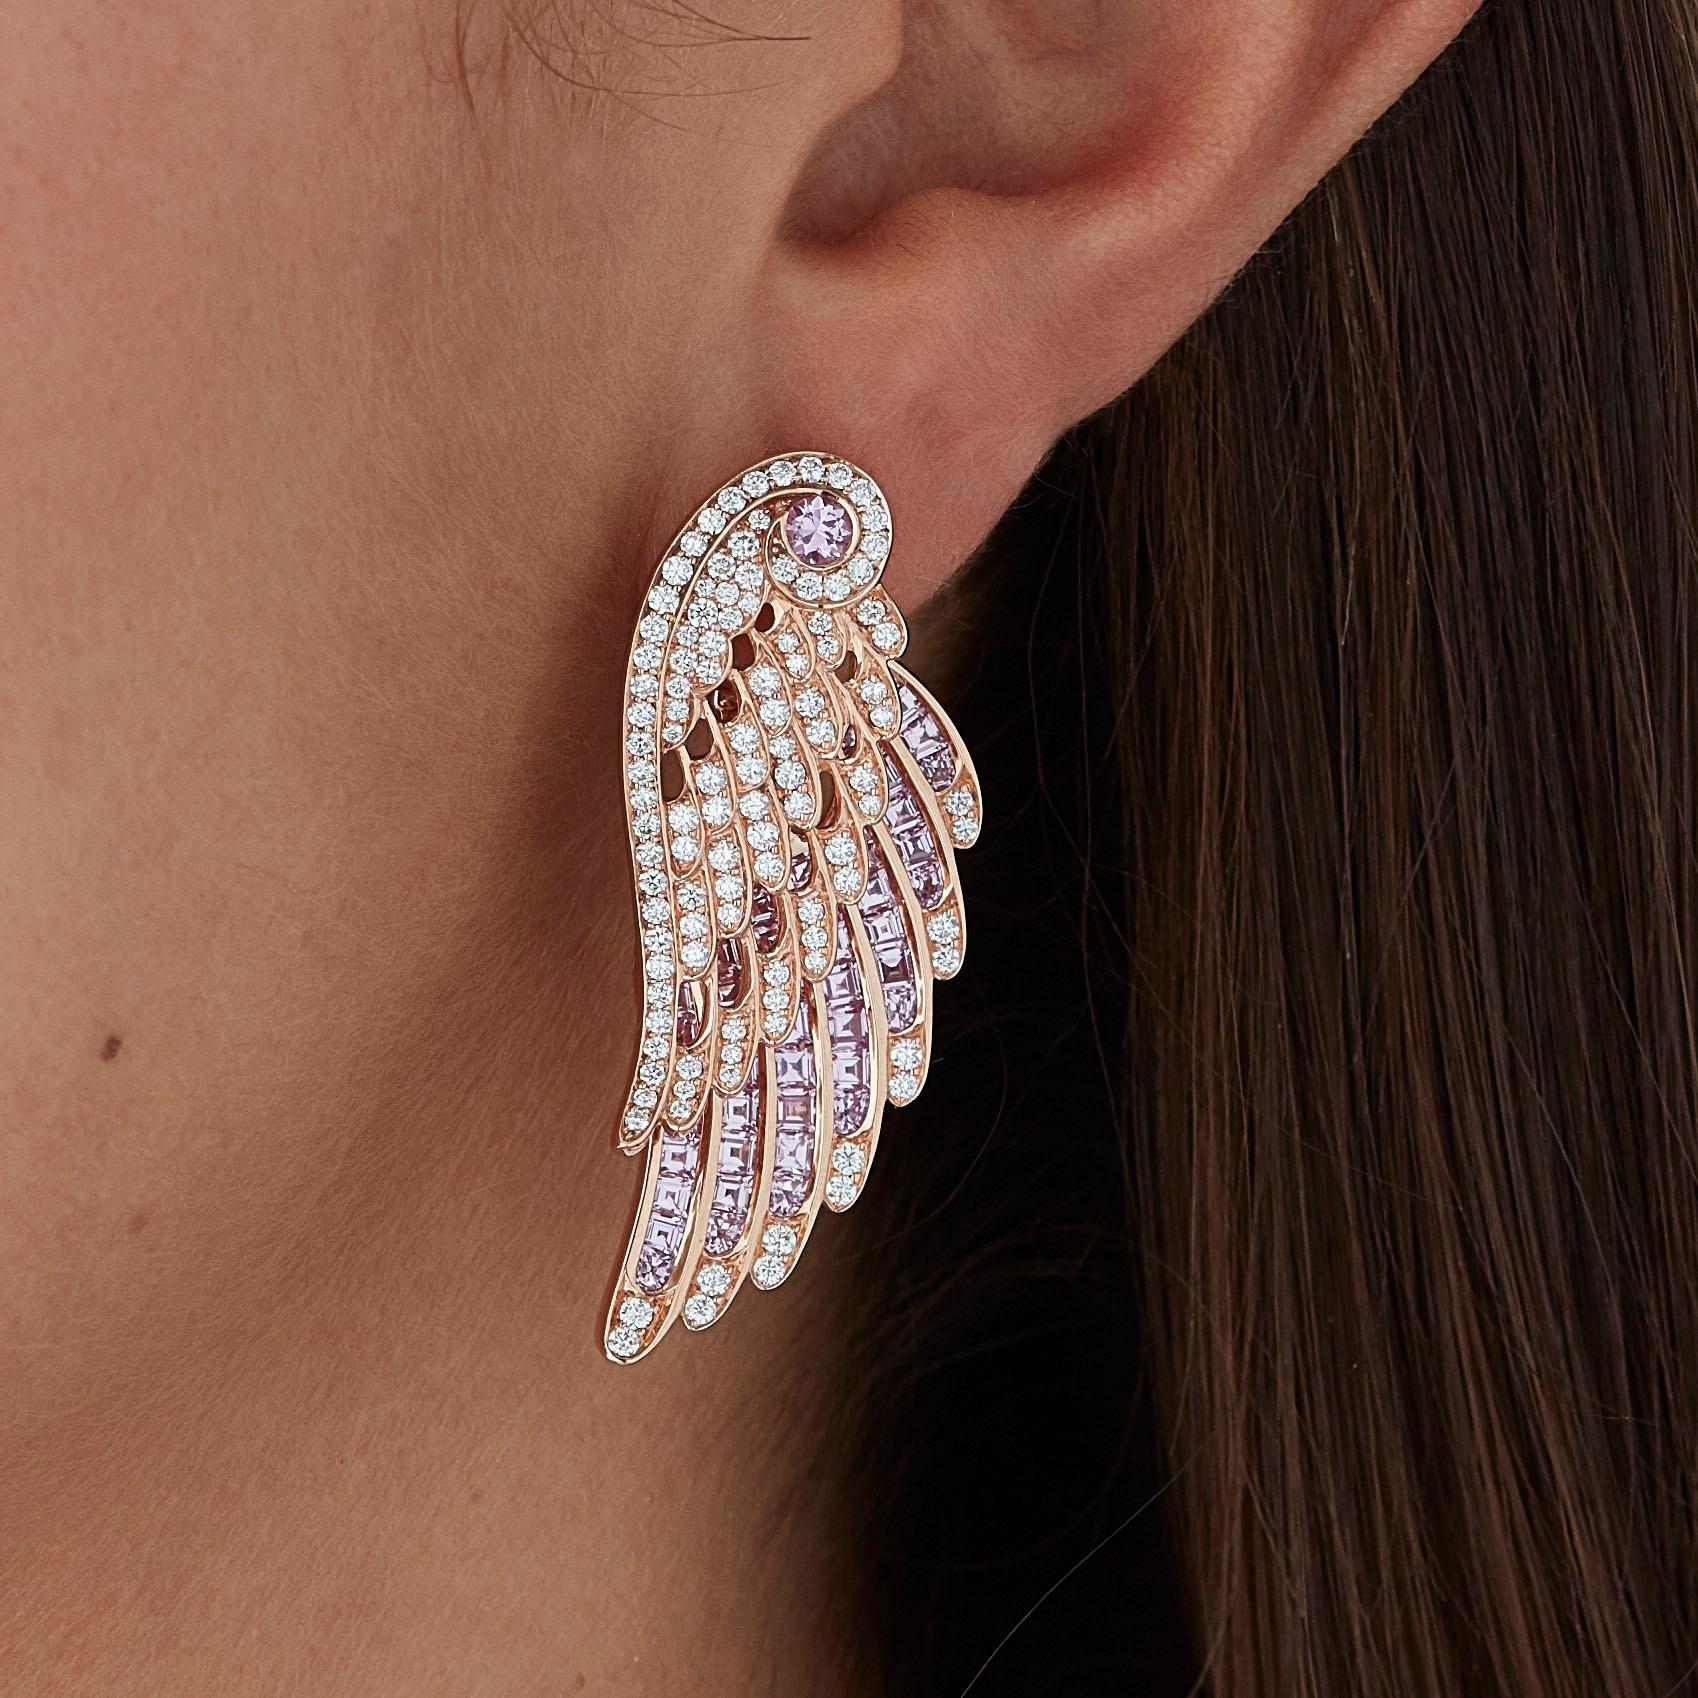 A House of Garrard pair of 18 karat rose gold drop earrings from the 'Wings Embrace' collection, set with round white diamonds and round and calibre cut pink sapphires.

222 round white diamonds weighing: 1.66cts
2 round pink sapphires weighing: